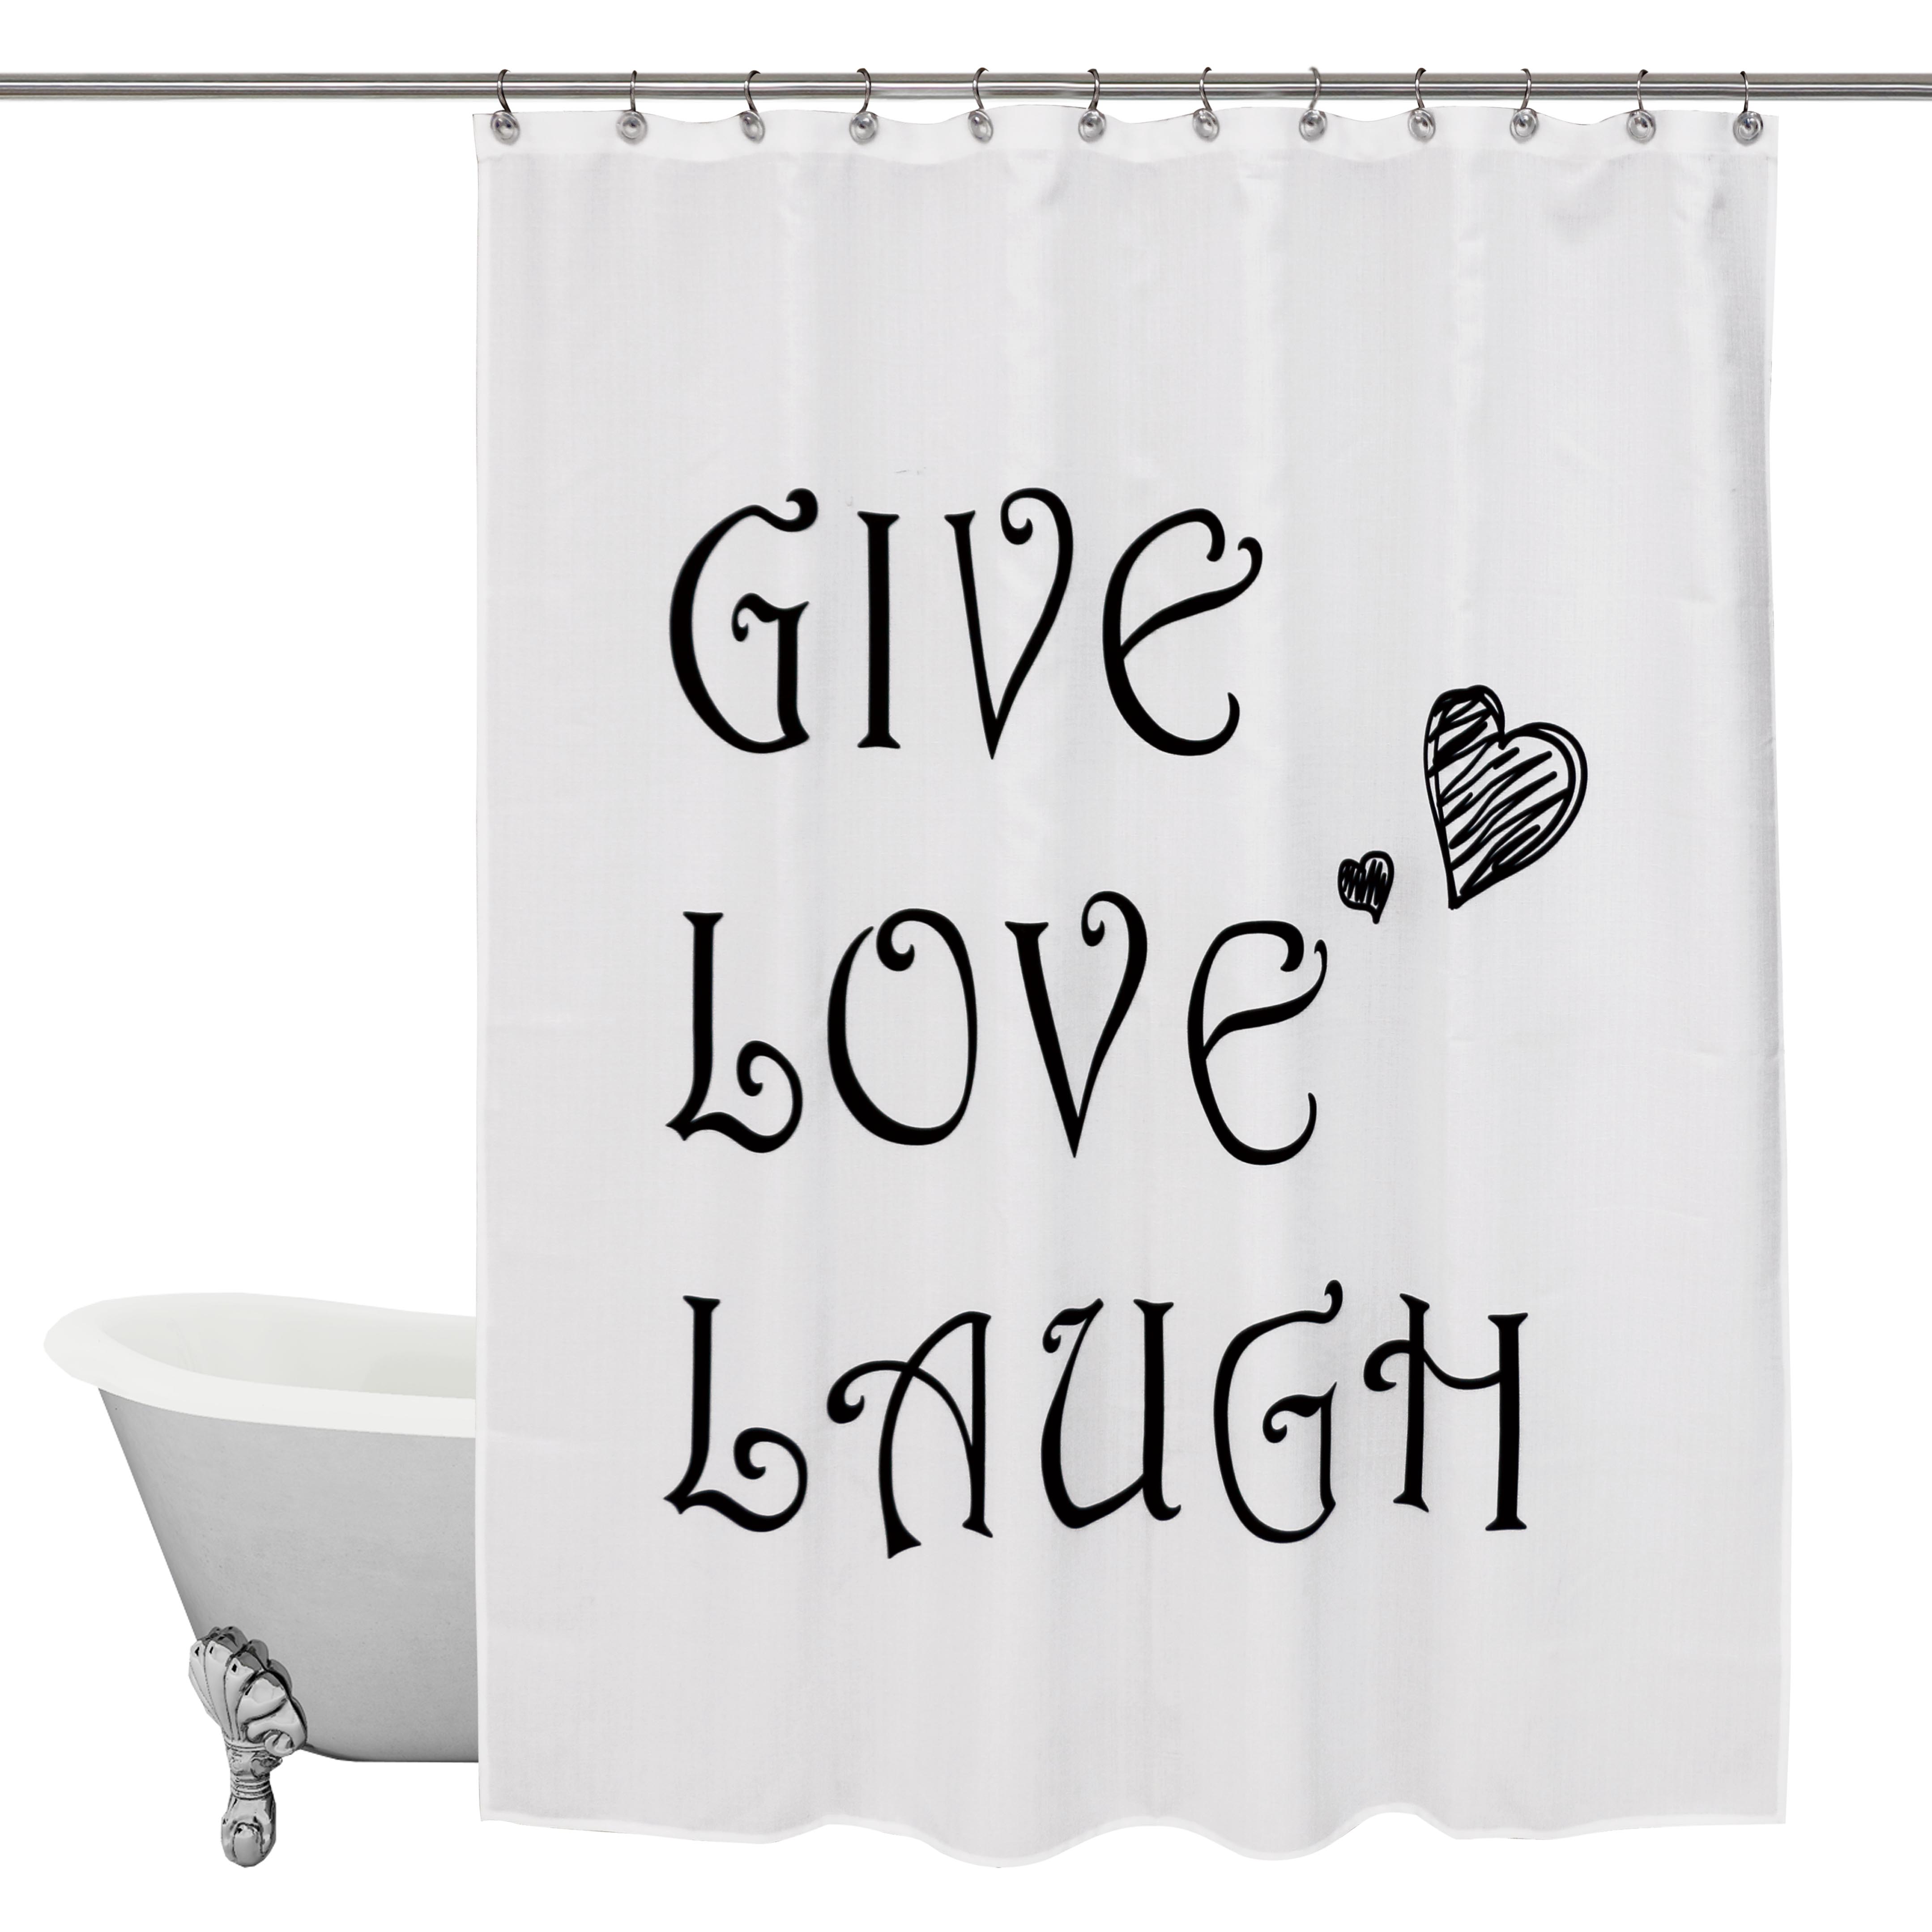 

Shower Does Matter Shower Curtain For Bathroom, Motivational And Inspirational Quotes, Polyester Fabric, 72 X 72 Inch, 1 Piece.